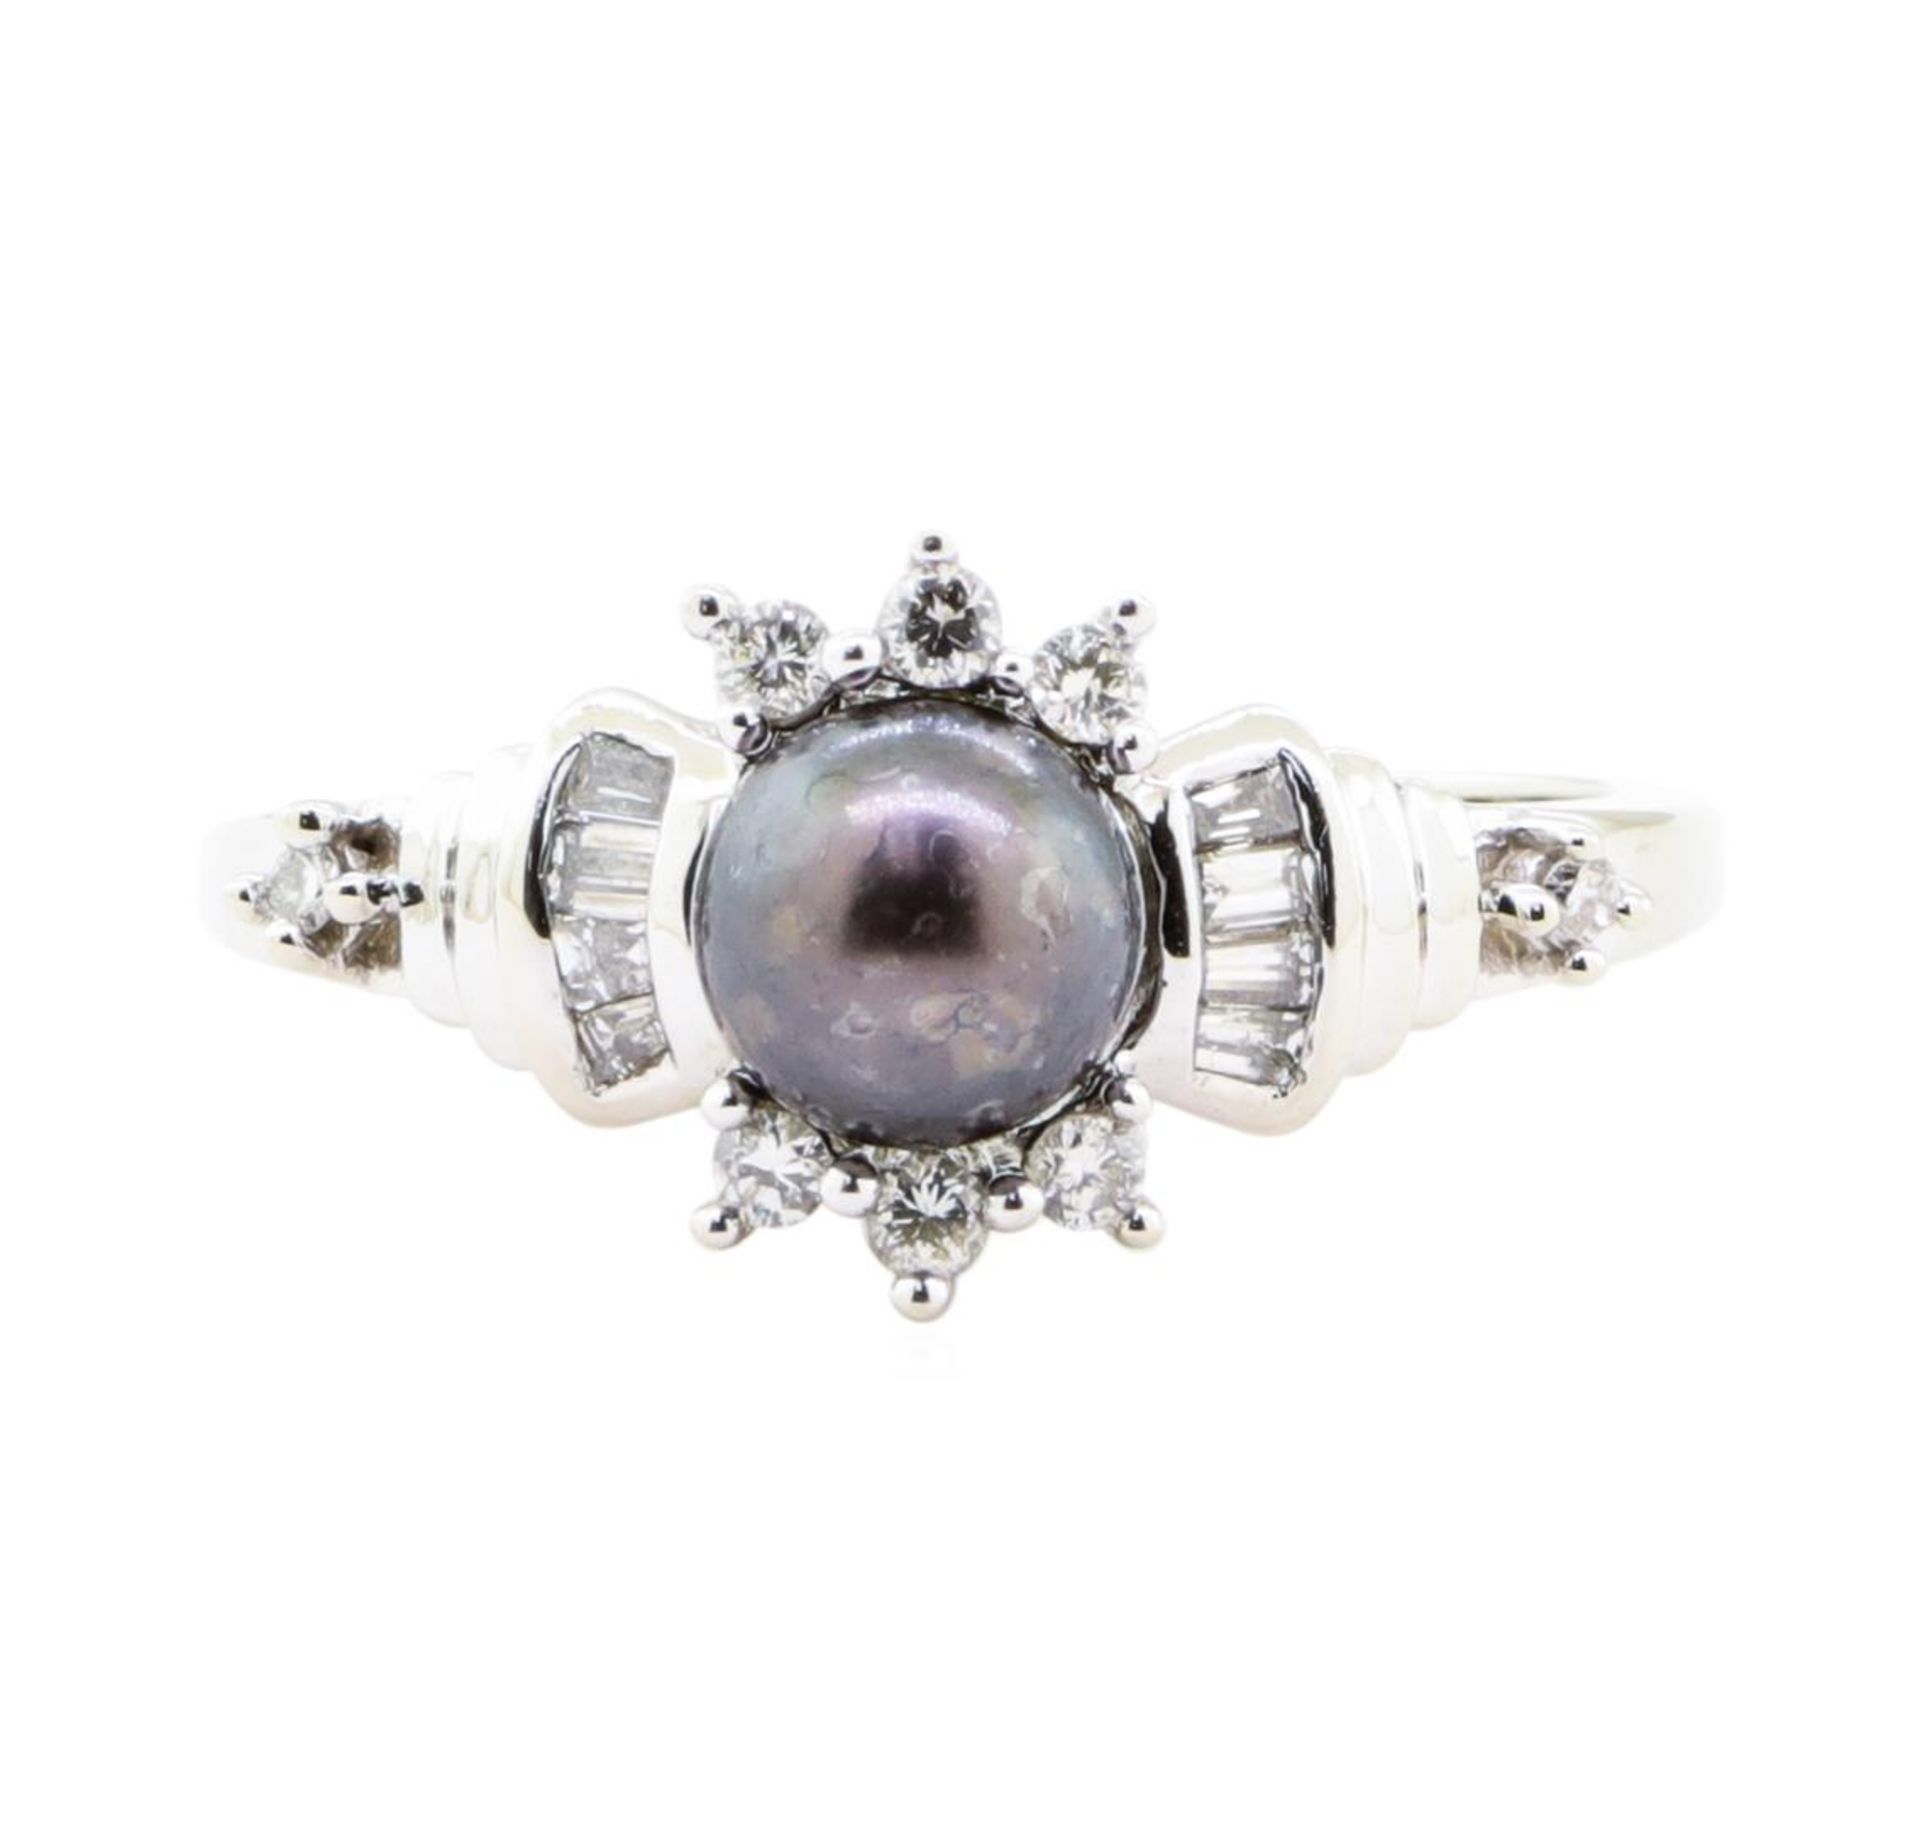 0.40 ctw Diamond and 7mm Dyed Black Pearl Ring - 14KT White Gold - Image 2 of 4